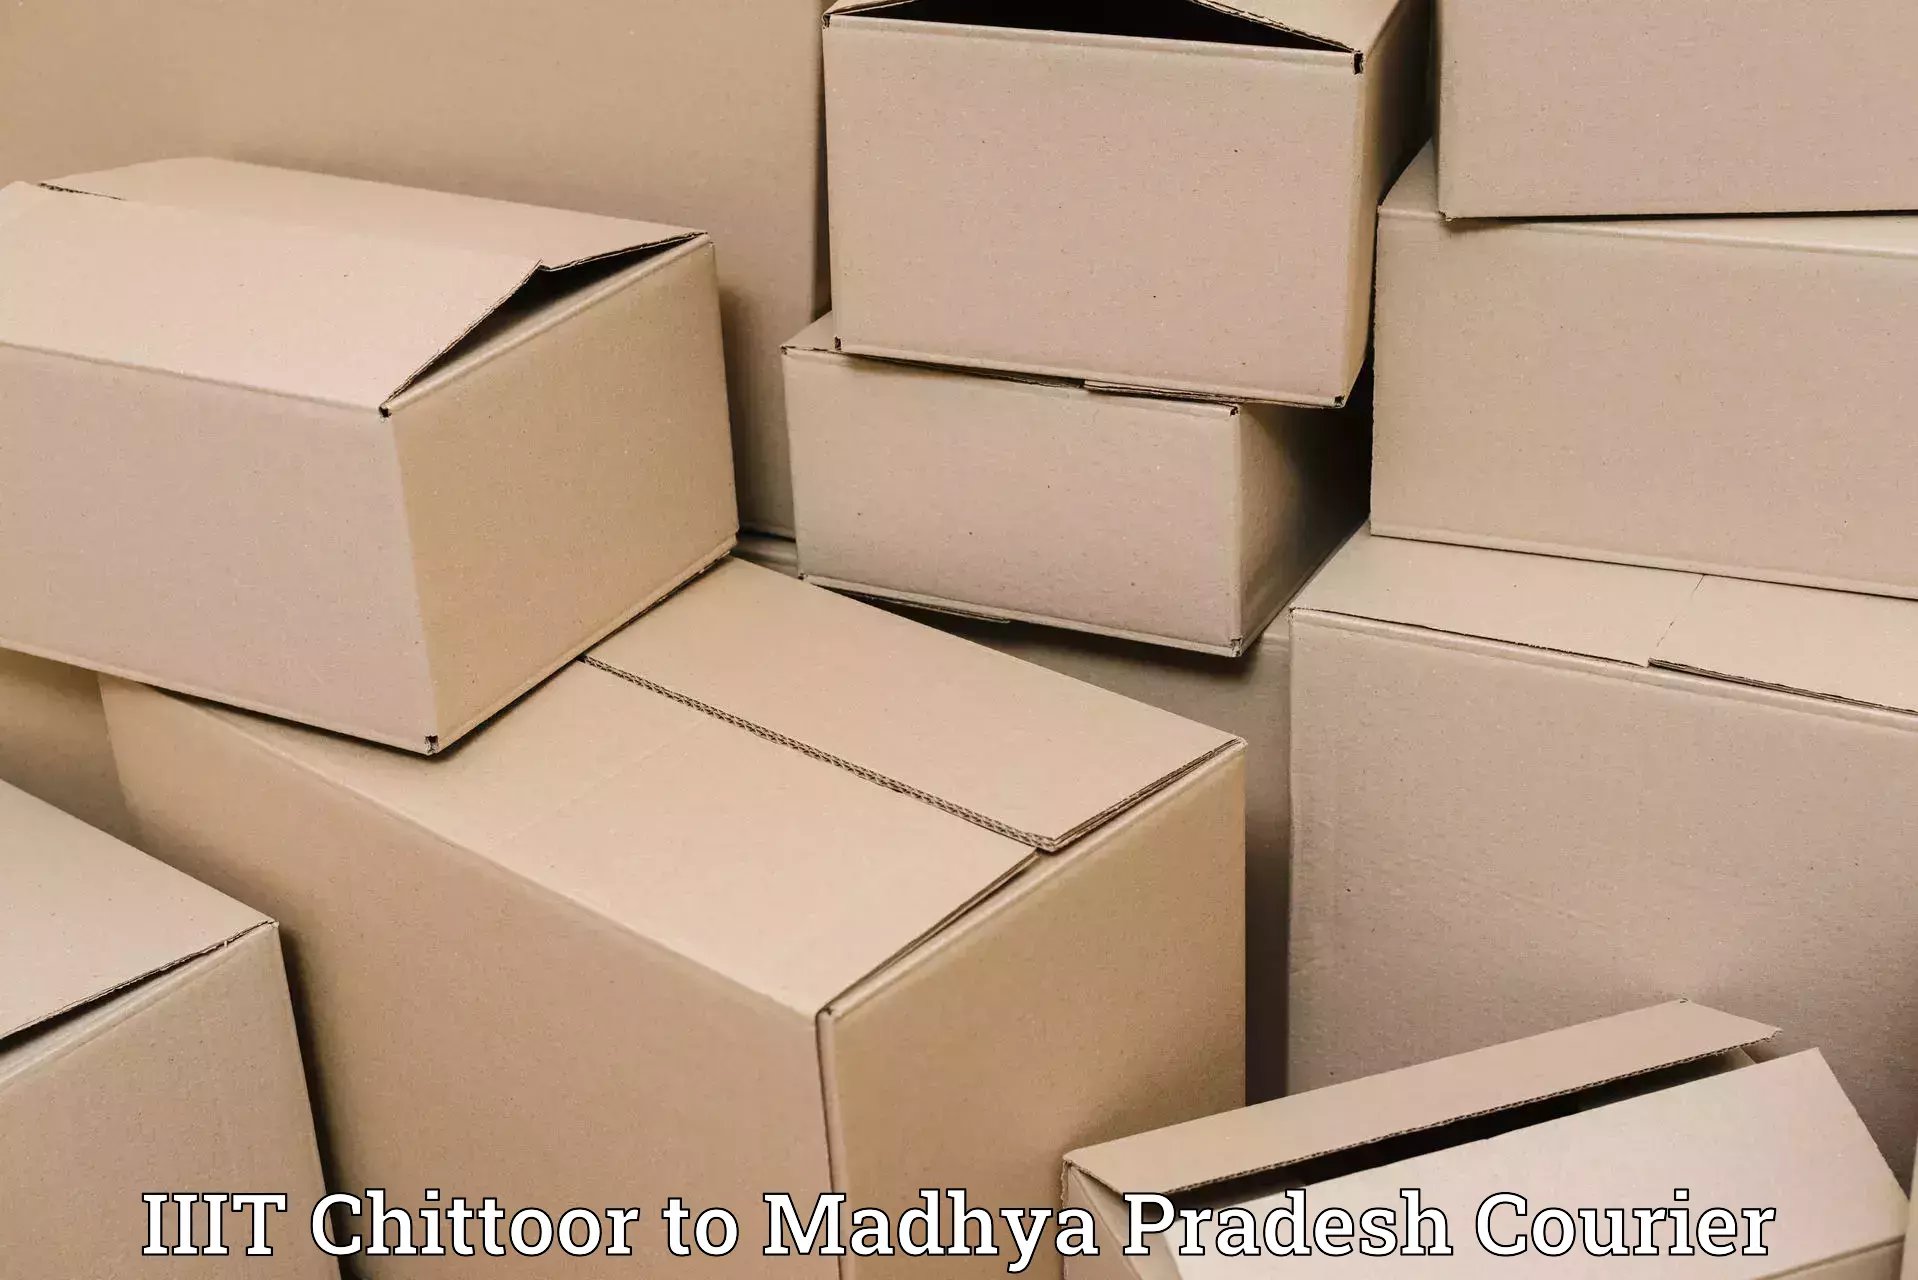 Multi-national courier services IIIT Chittoor to Sausar